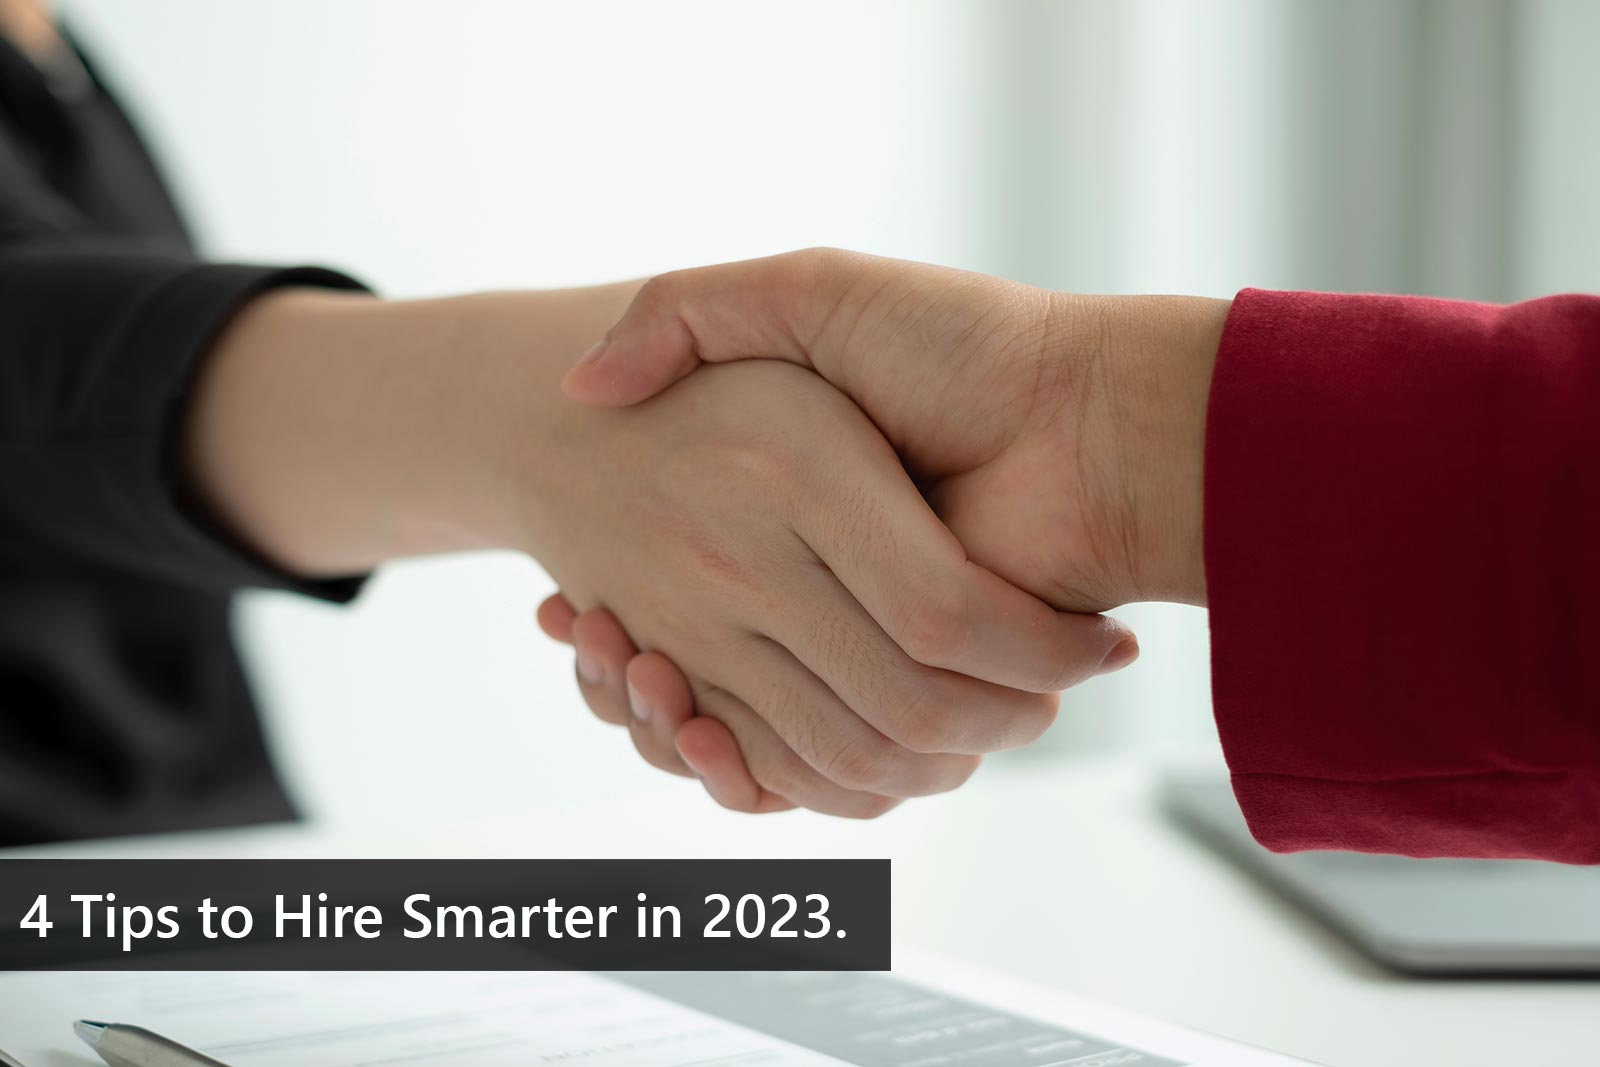 4 Tips to hire smarter in 2023